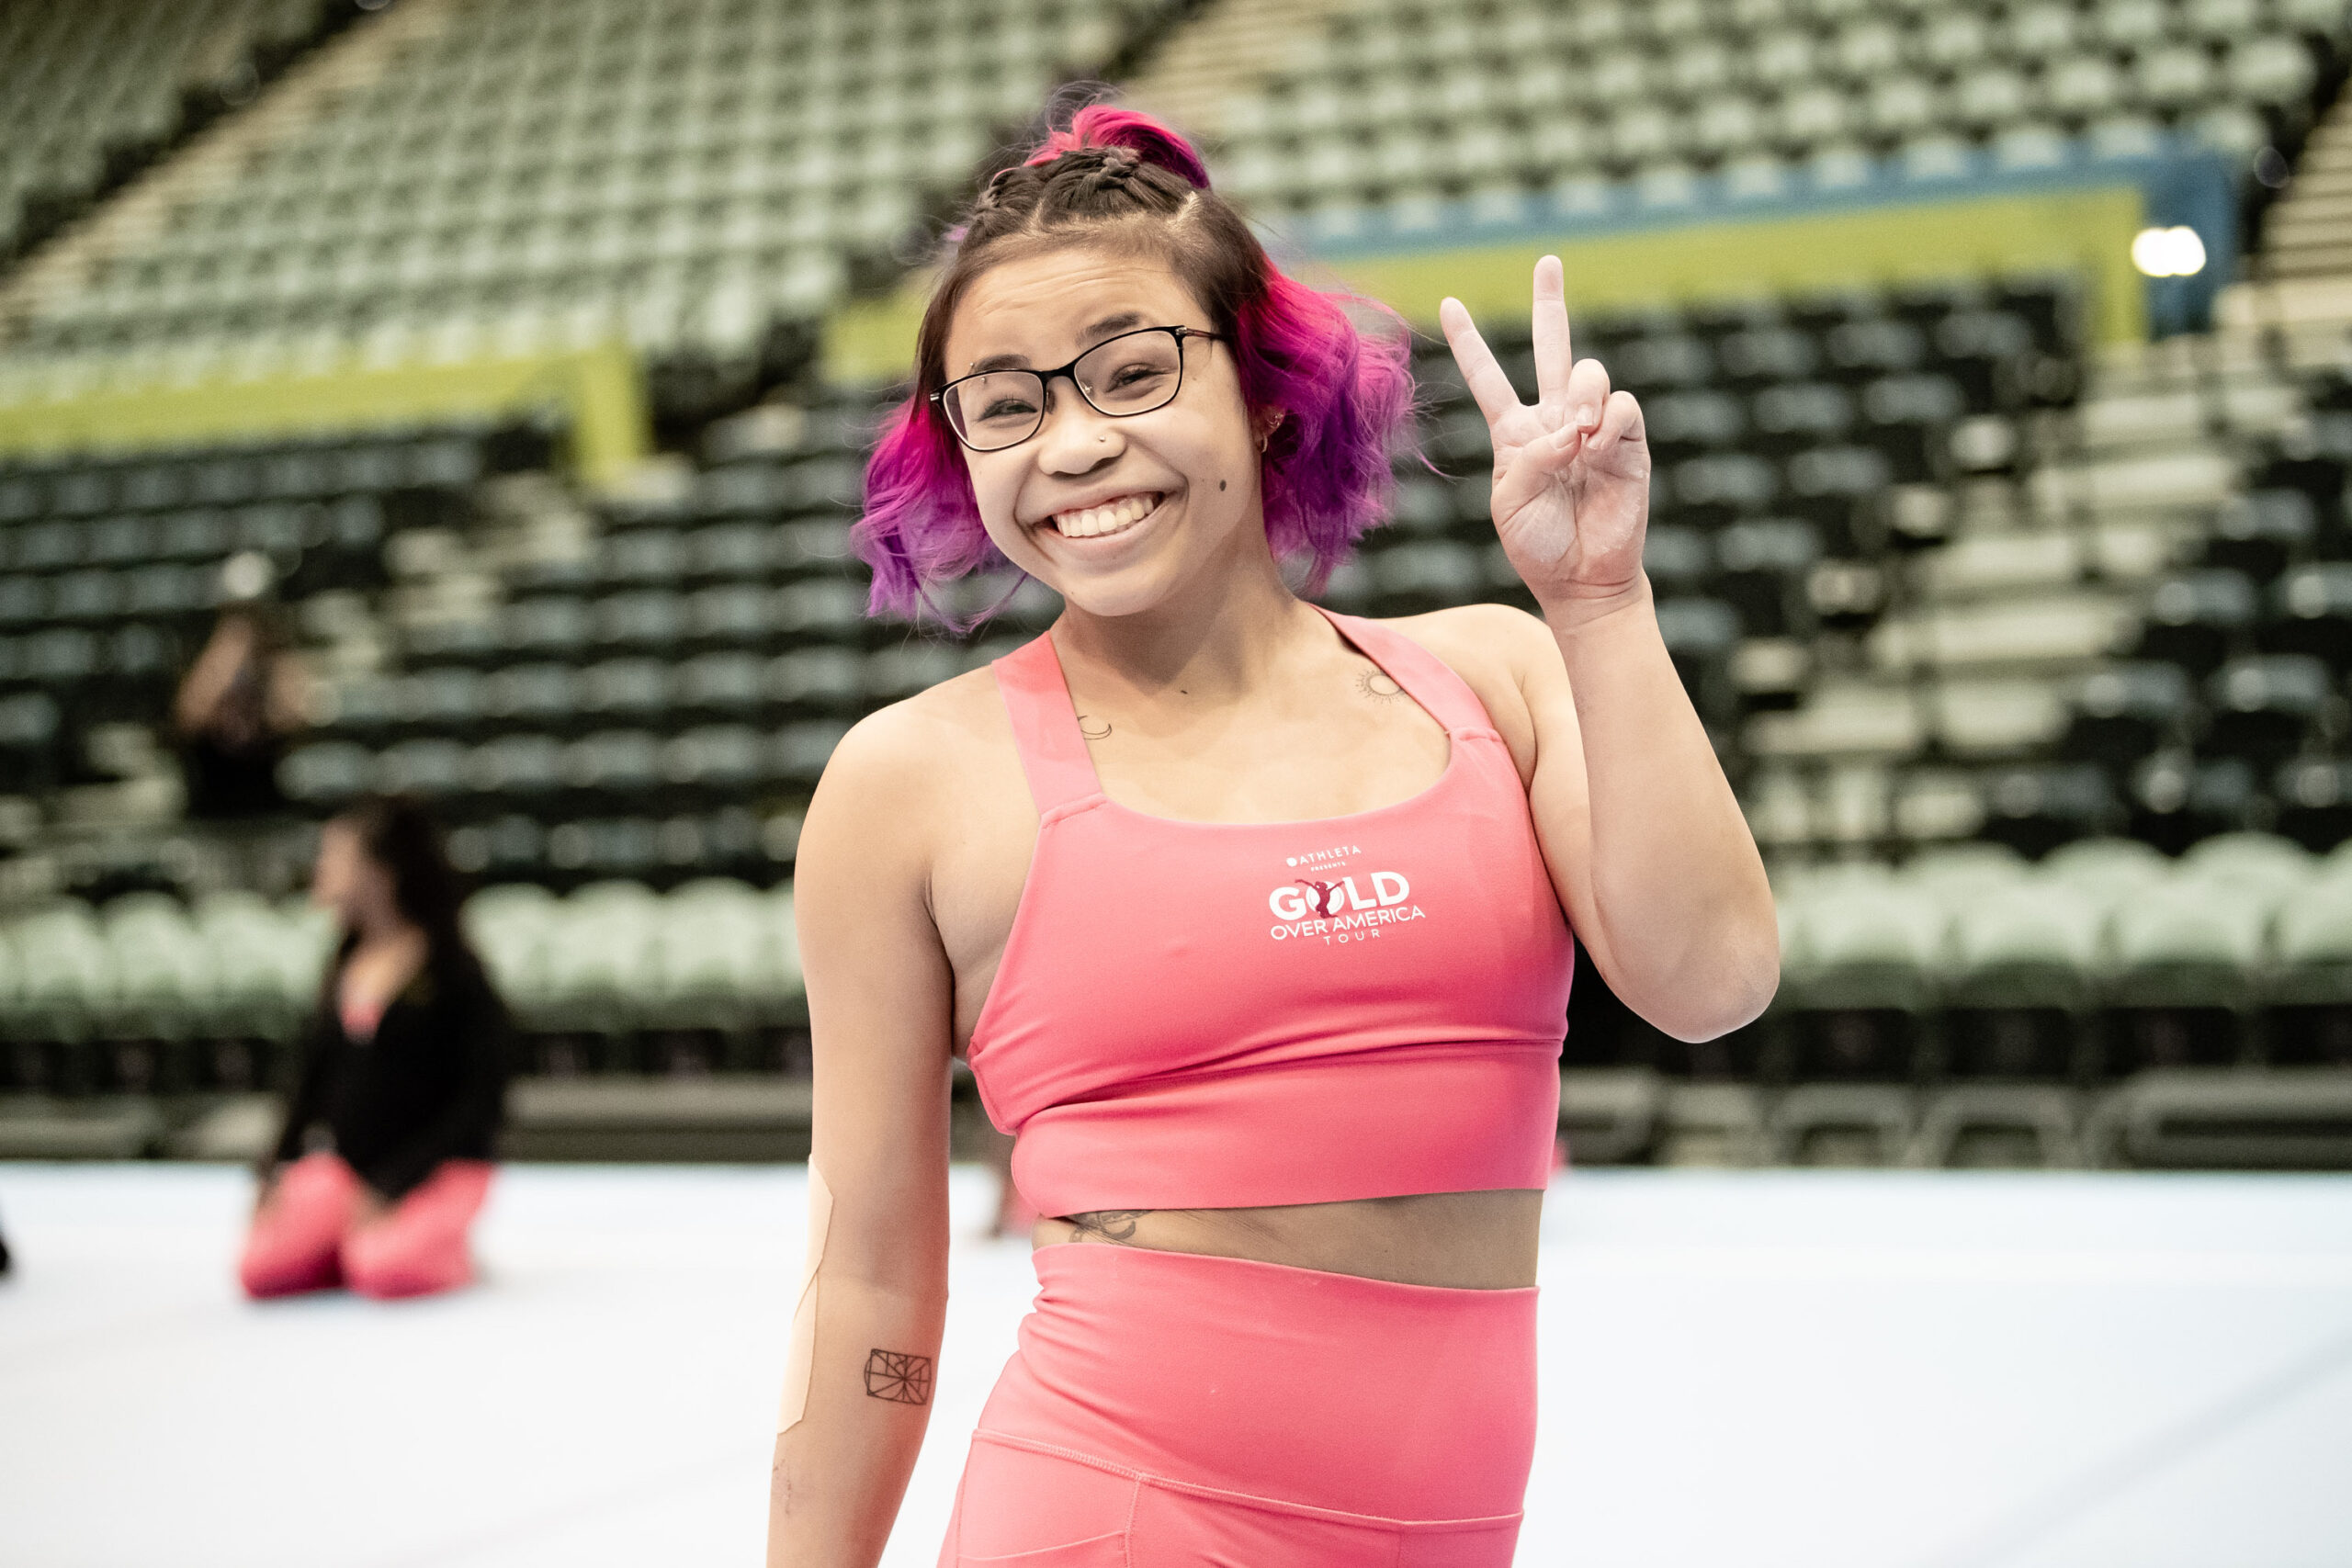 5x World Medalist Gymnast Morgan Hurd Talks Social Justice And Embracing Identity On And Off The